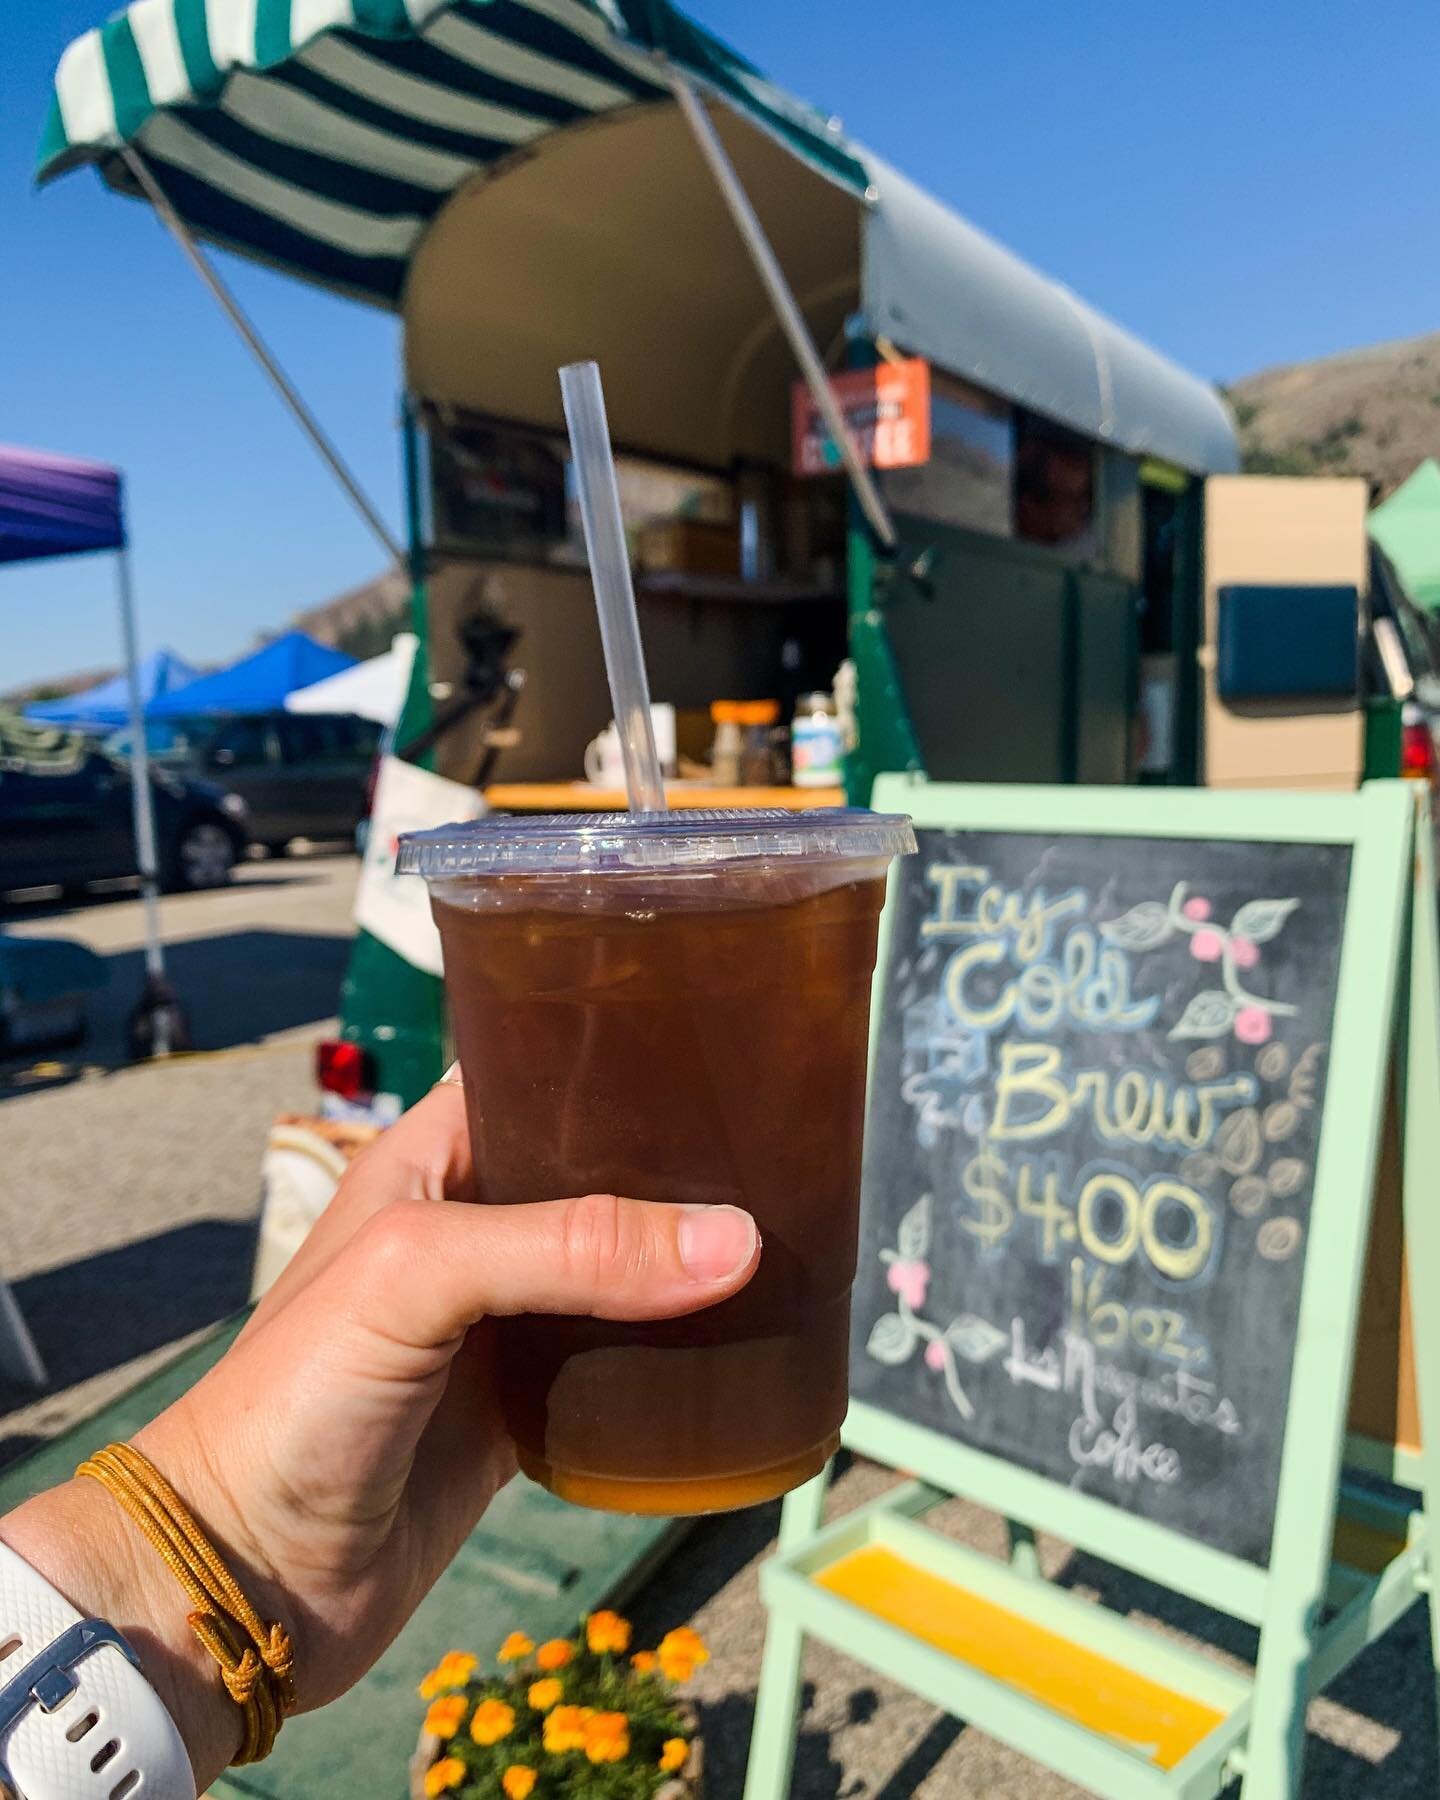 Looking for an iced beverage to keep cool today? Stop by the market! We are open 8am-12pm. ☀️

@lasmargaritascoffee Cold Brew ☕️
Smoothie Dave 🍓
King&rsquo;s Vegetarian Bubble Tea &amp; Lemonade 🍋

#bcfarmersmarket #bcfarmersmarkettrail #vernonfarm